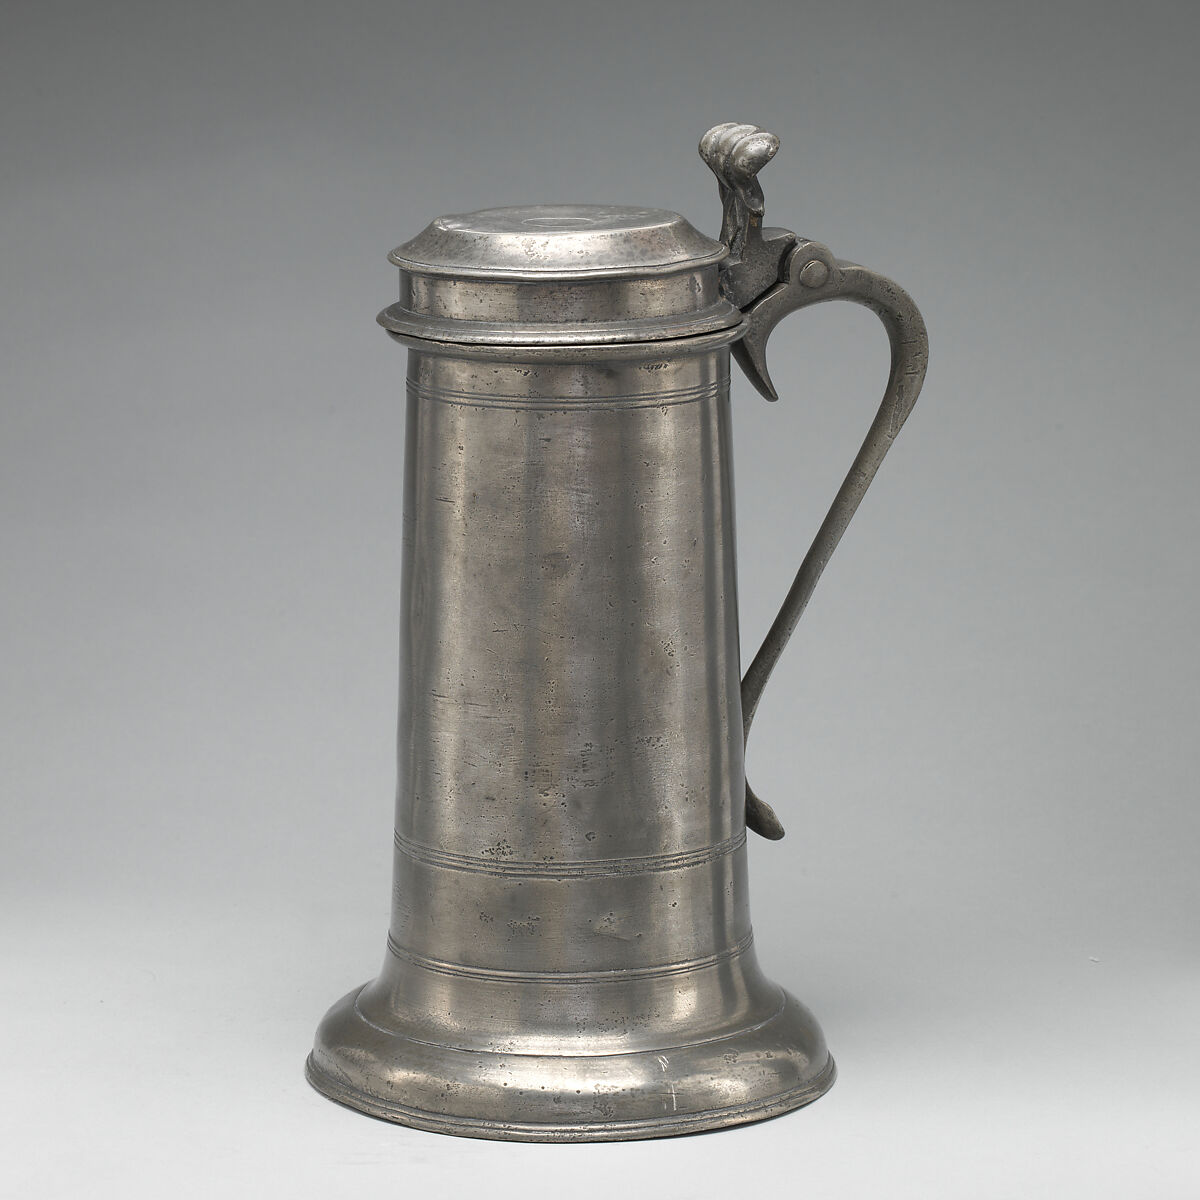 Flagon, T. S. (British (possibly for Thomas Stone, recorded 1667, or Thomas Smith, recorded 1669)), Pewter, British 